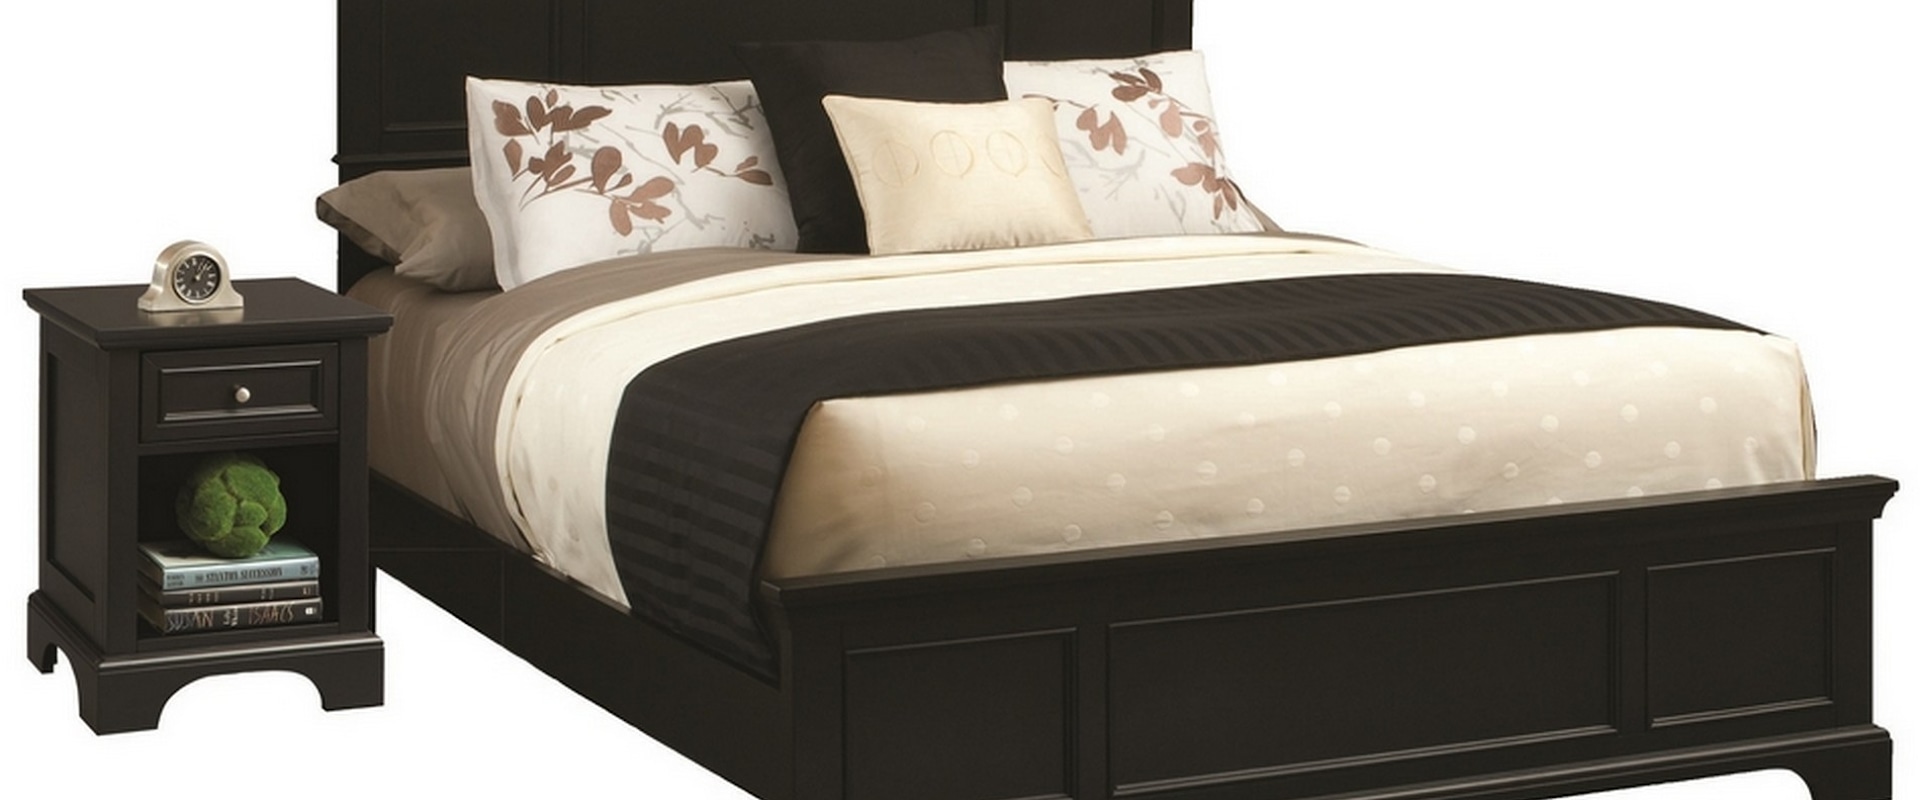 Traditional King Bed and Nightstand Set